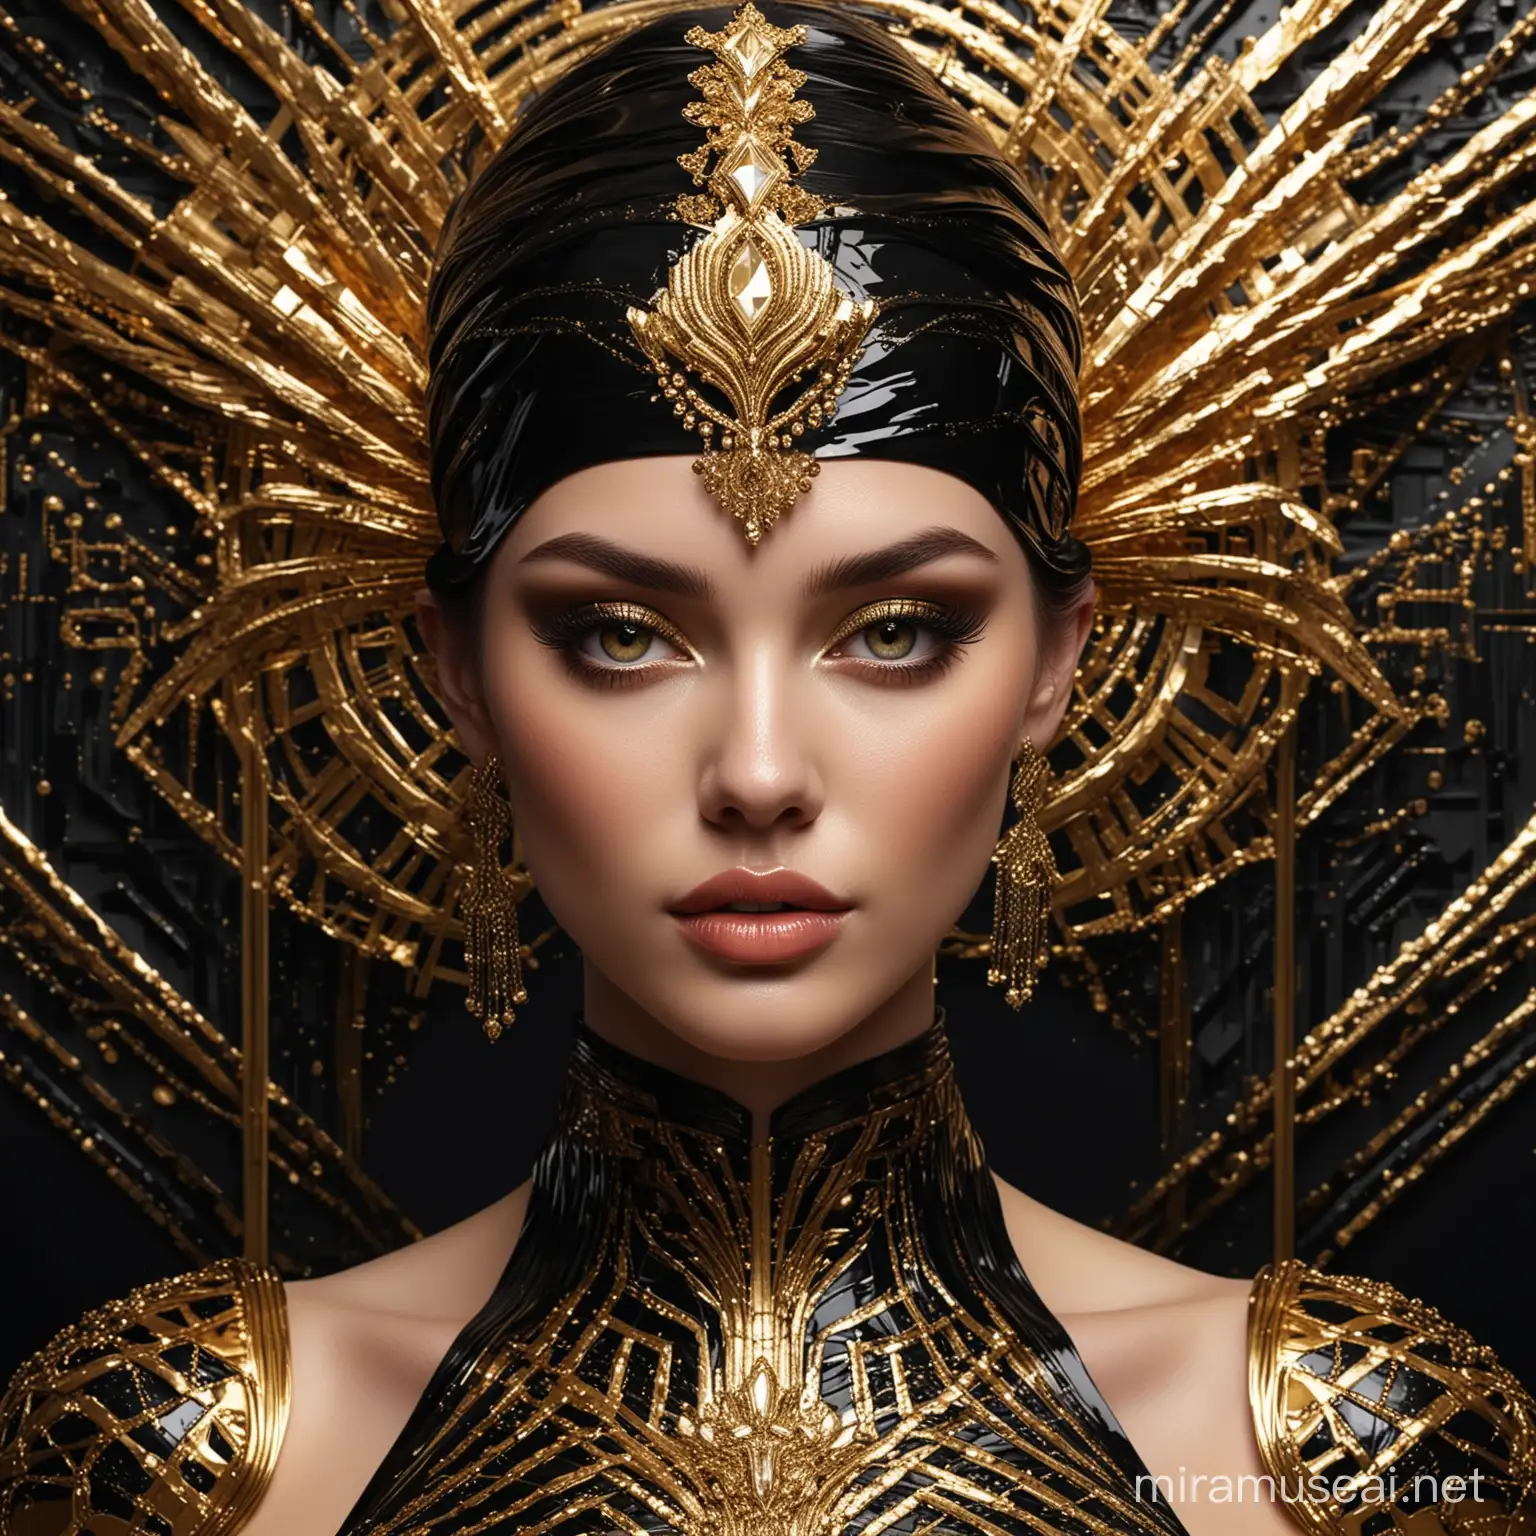 Craft a digital art portrait of a woman with a glossy, statuesque look. Her skin is a shimmering gradient of black and gold tones, catching the light to emphasize her chiseled features. Her eyes are accentuated with bold, metallic eyeshadow and her lips are painted a sleek, glossy black. She wears a striking headpiece and garments with a geometric pattern that combines sharp angles and flowing curves, in glossy black and vibrant gold colors. The background is a complex array of golden lines creating an abstract, art-deco inspired pattern that complements the headpiece. The entire composition should exude luxury and sophistication, with a strong contrast between the rich black and glowing gold elements, a hyper-realistic render with intricate details, 32k render, hyperrealistic, detailed.